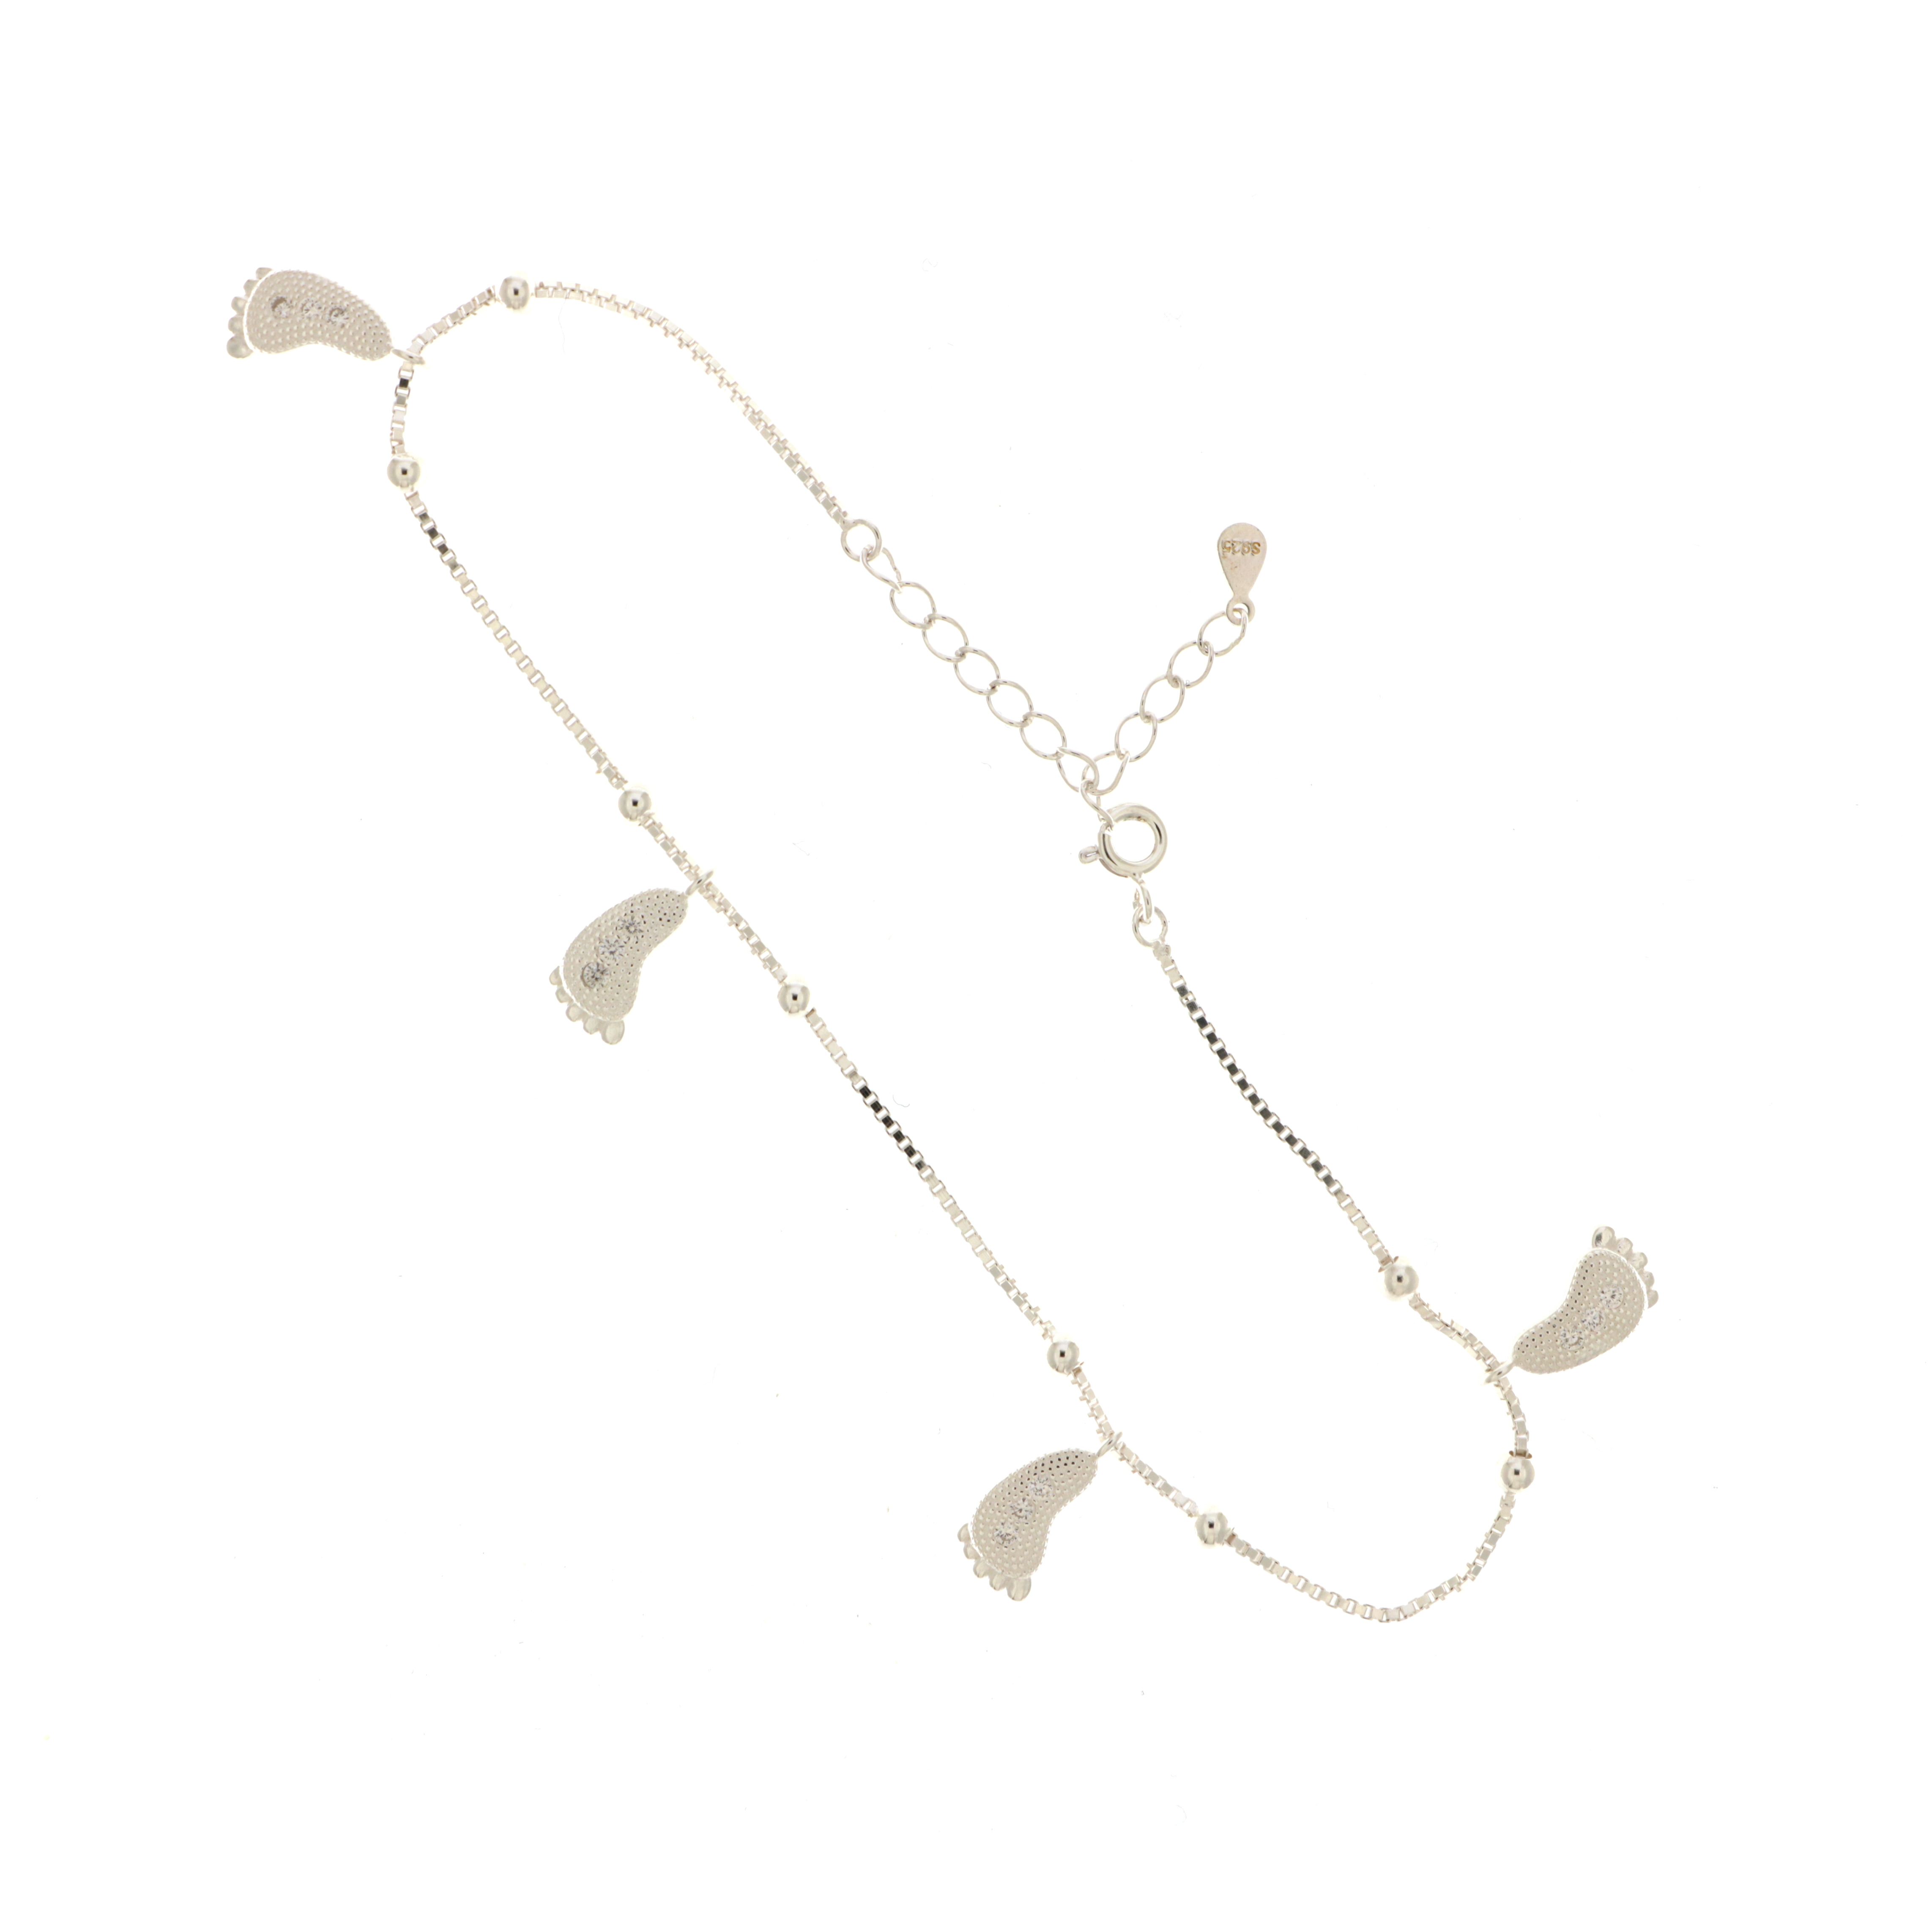 925 Sterling Silver Charms Anklet (Single)